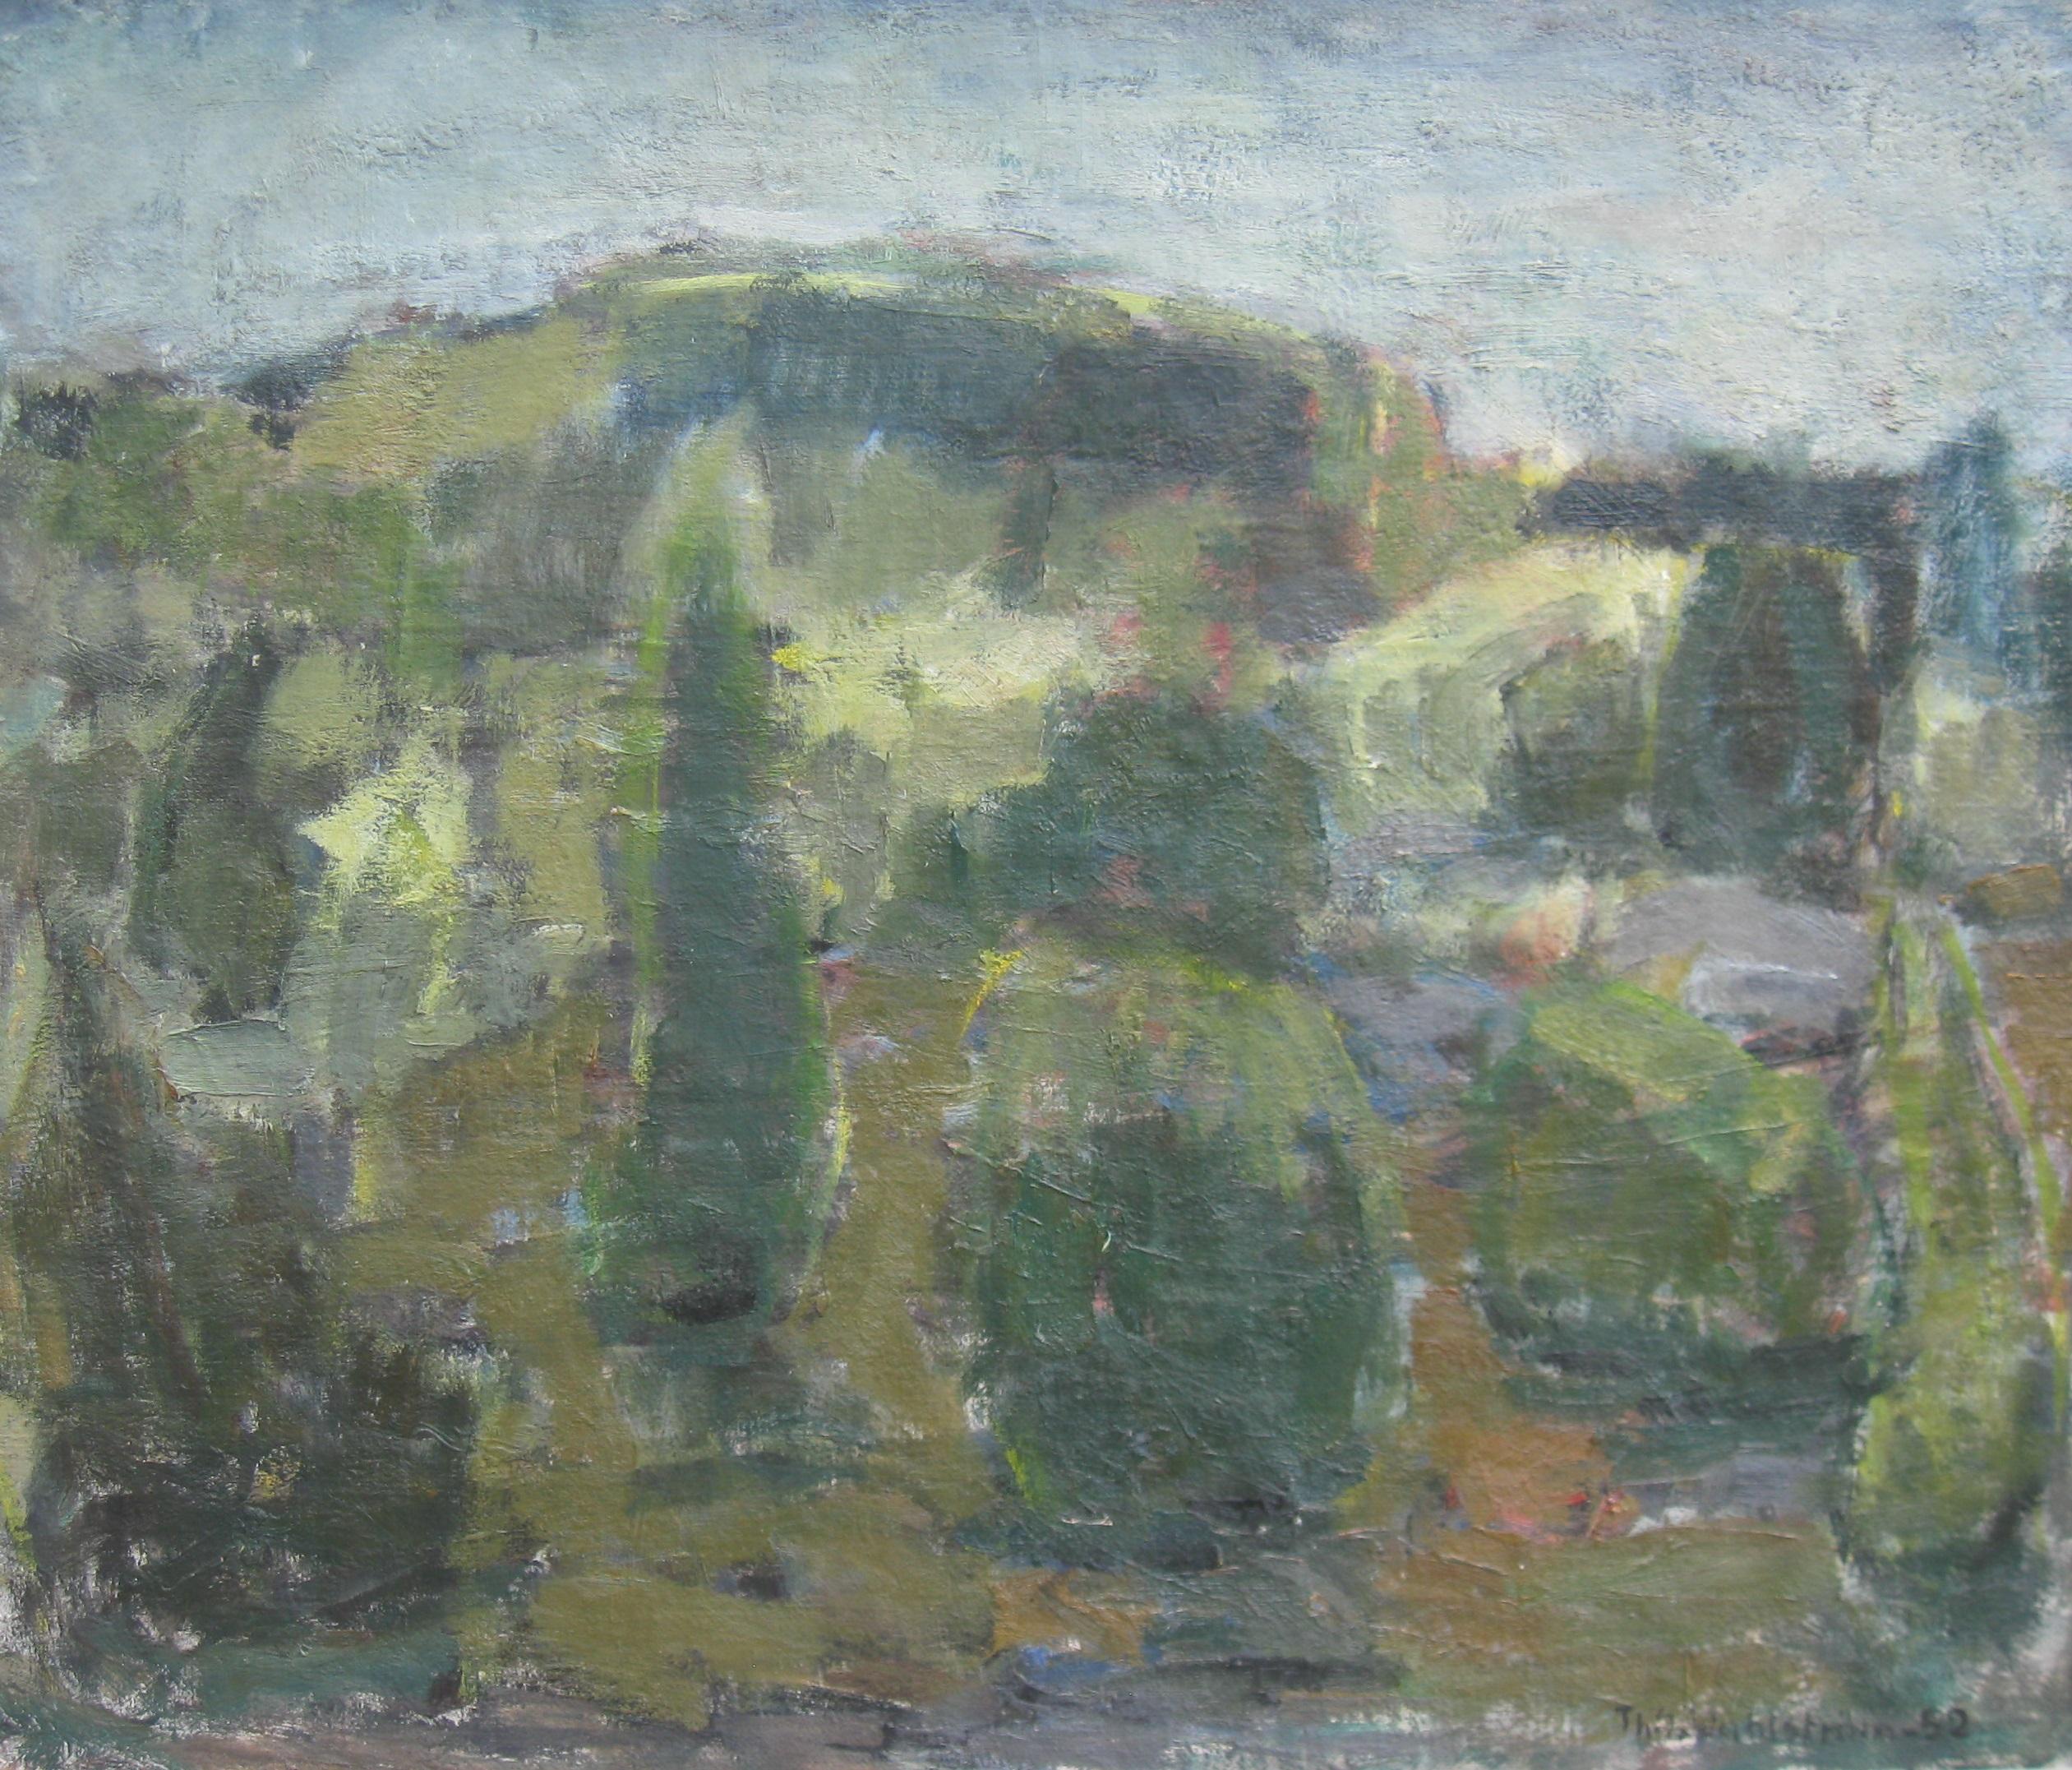 Post Impressionist/ Modernist; 'Hilly Landscape with Ruins' oil circa 1952 - Painting by Unknown